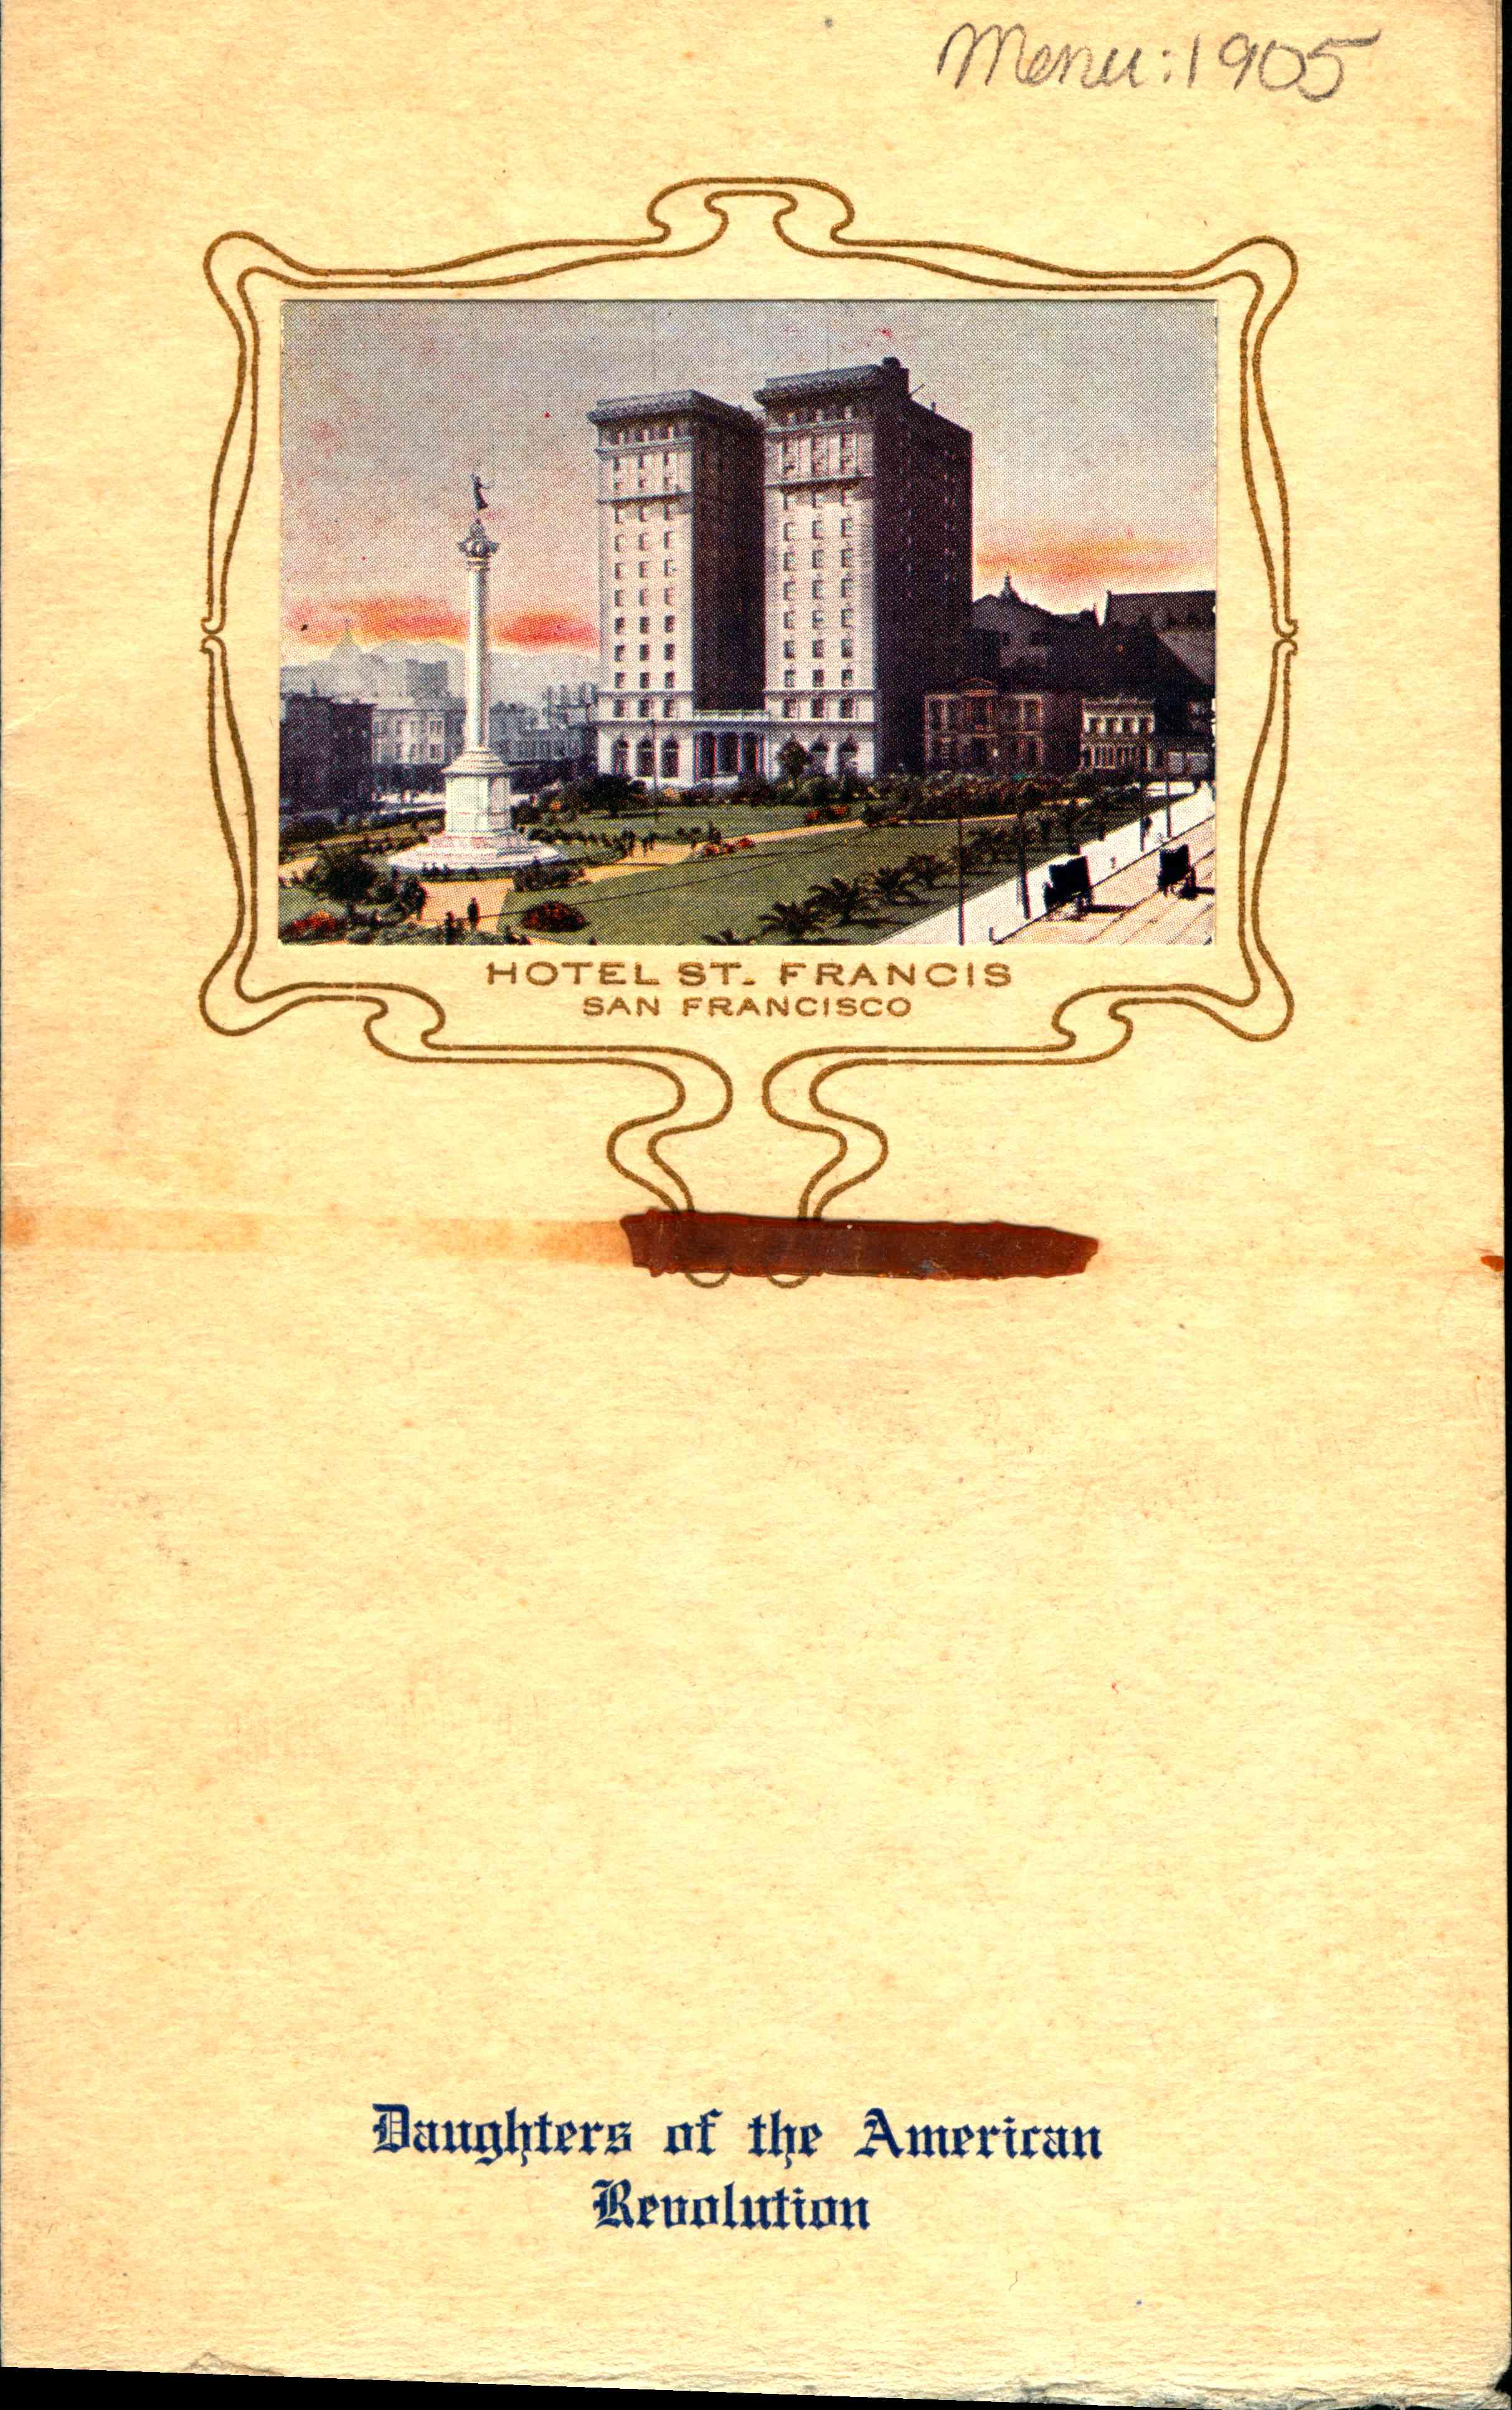 A picture of the hotel on the front of the menu